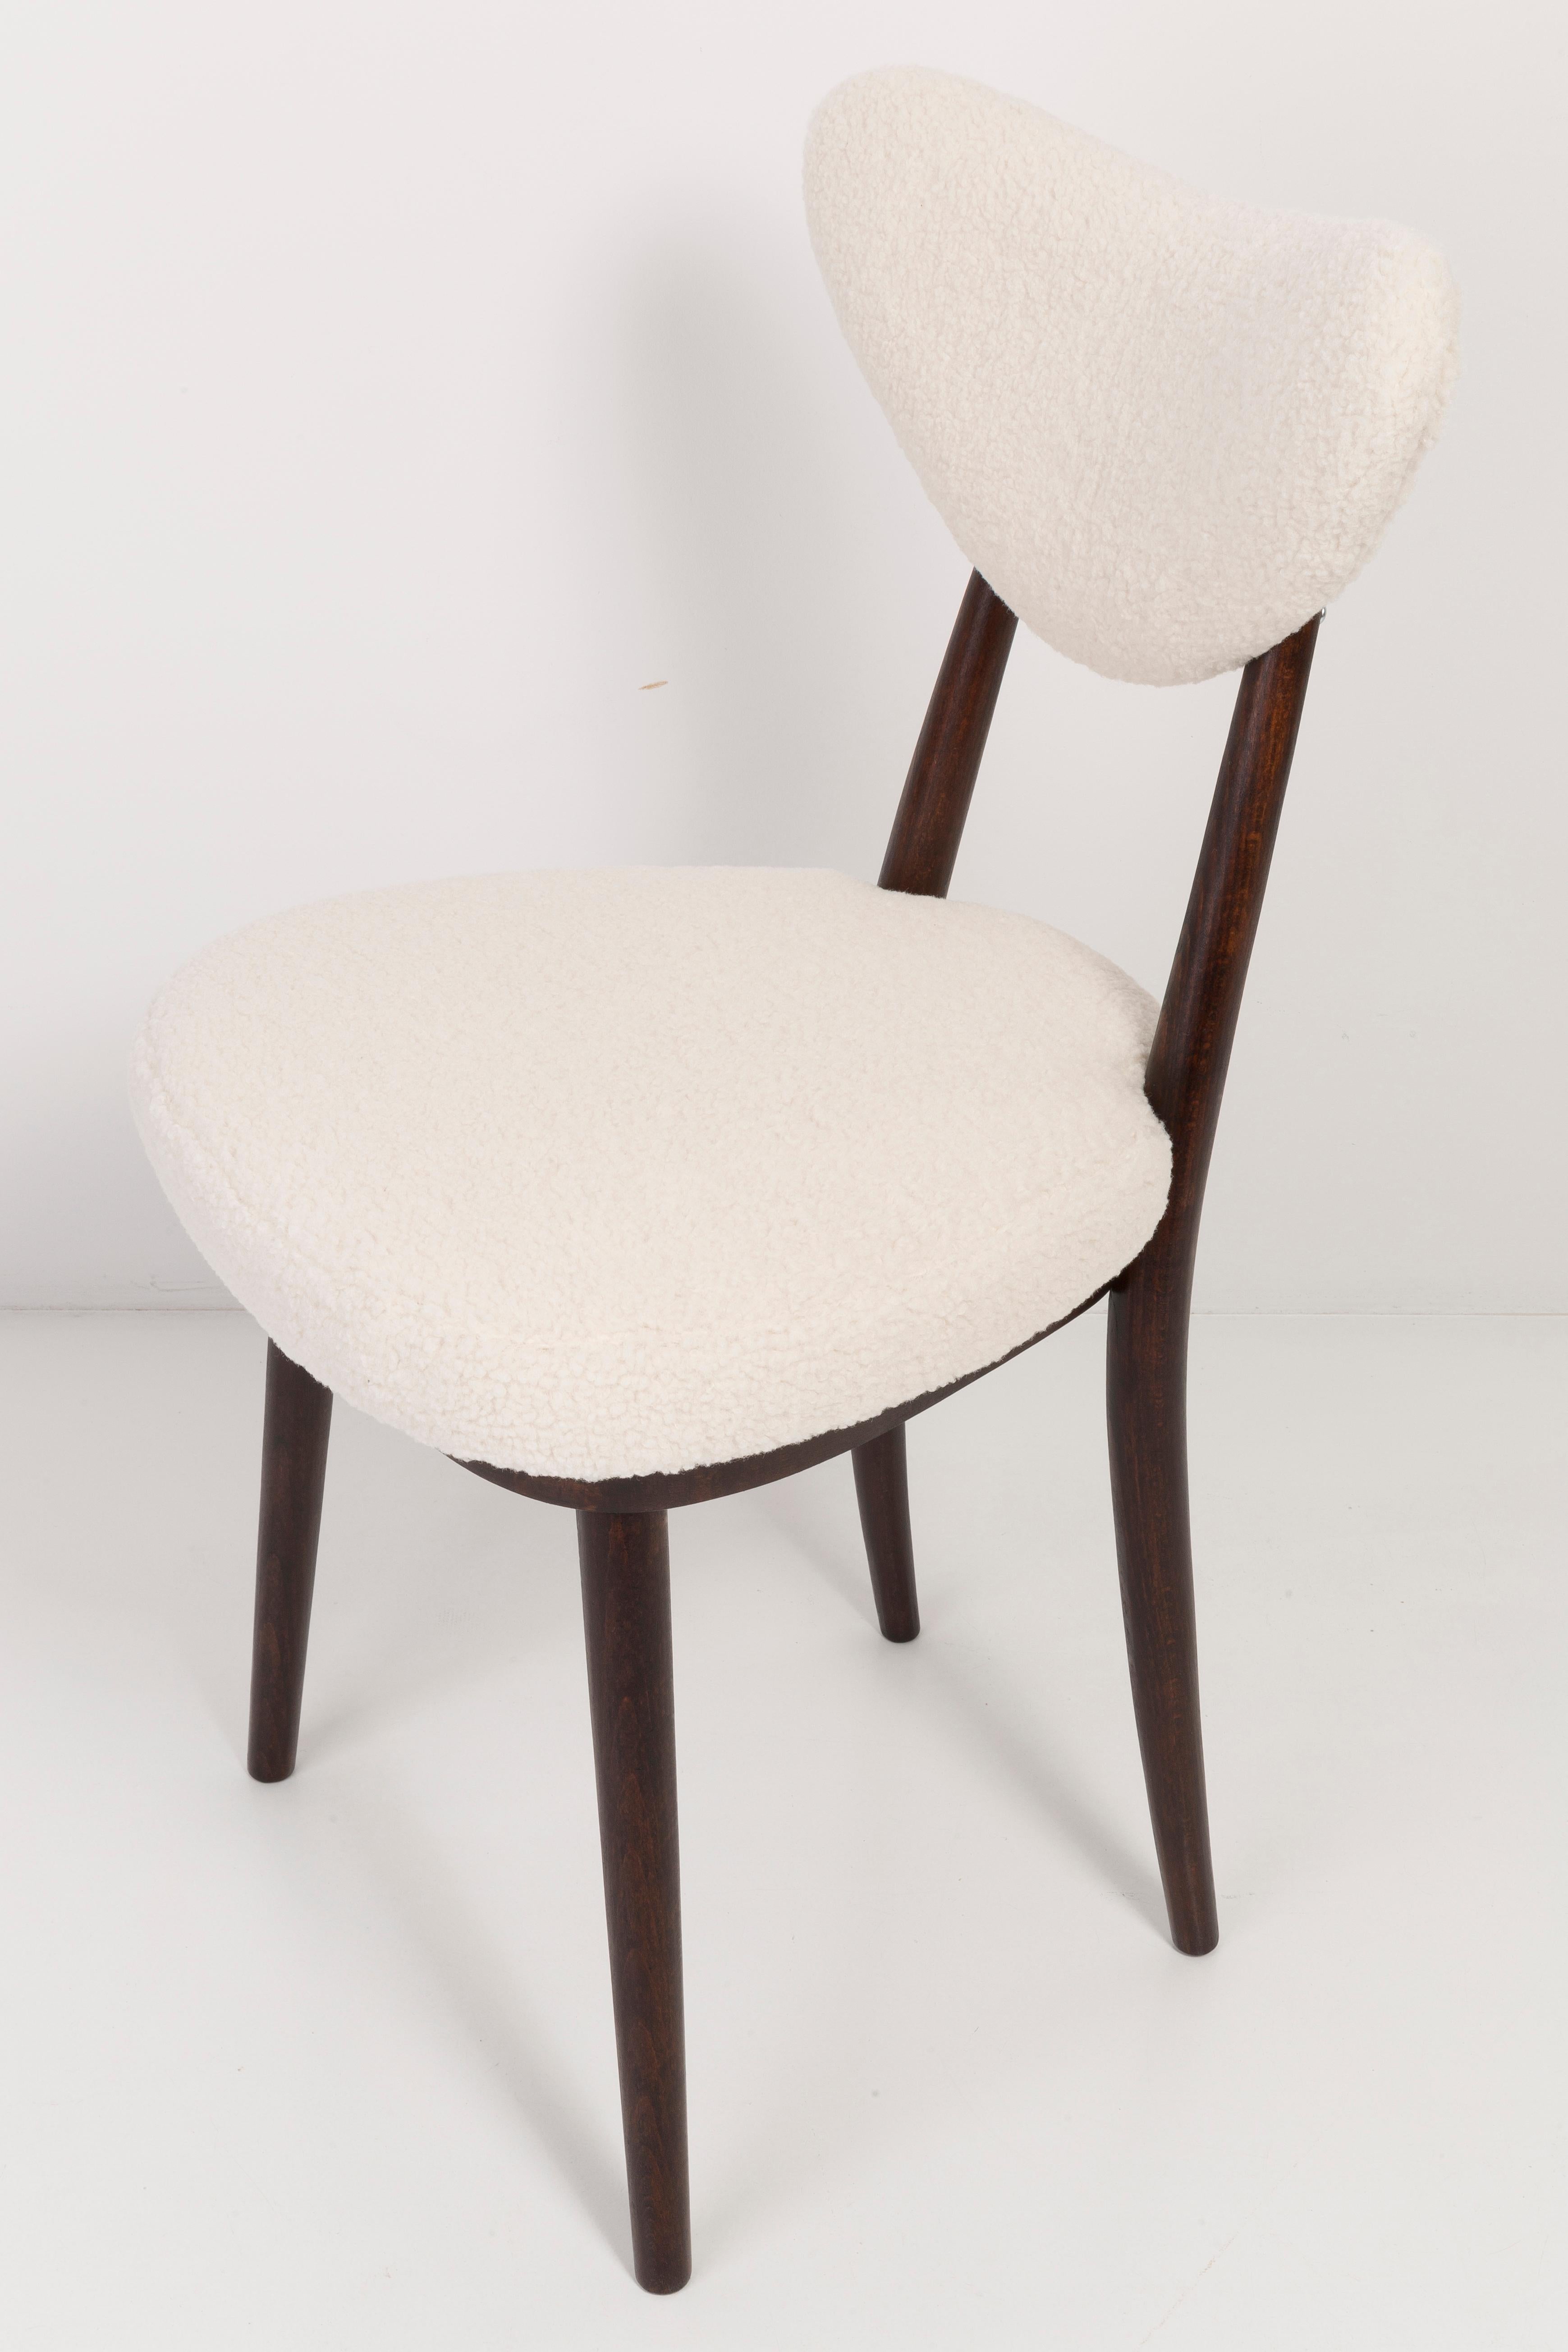 Set of Ten Light Boucle Heart Chairs, Europe, 1960s For Sale 2